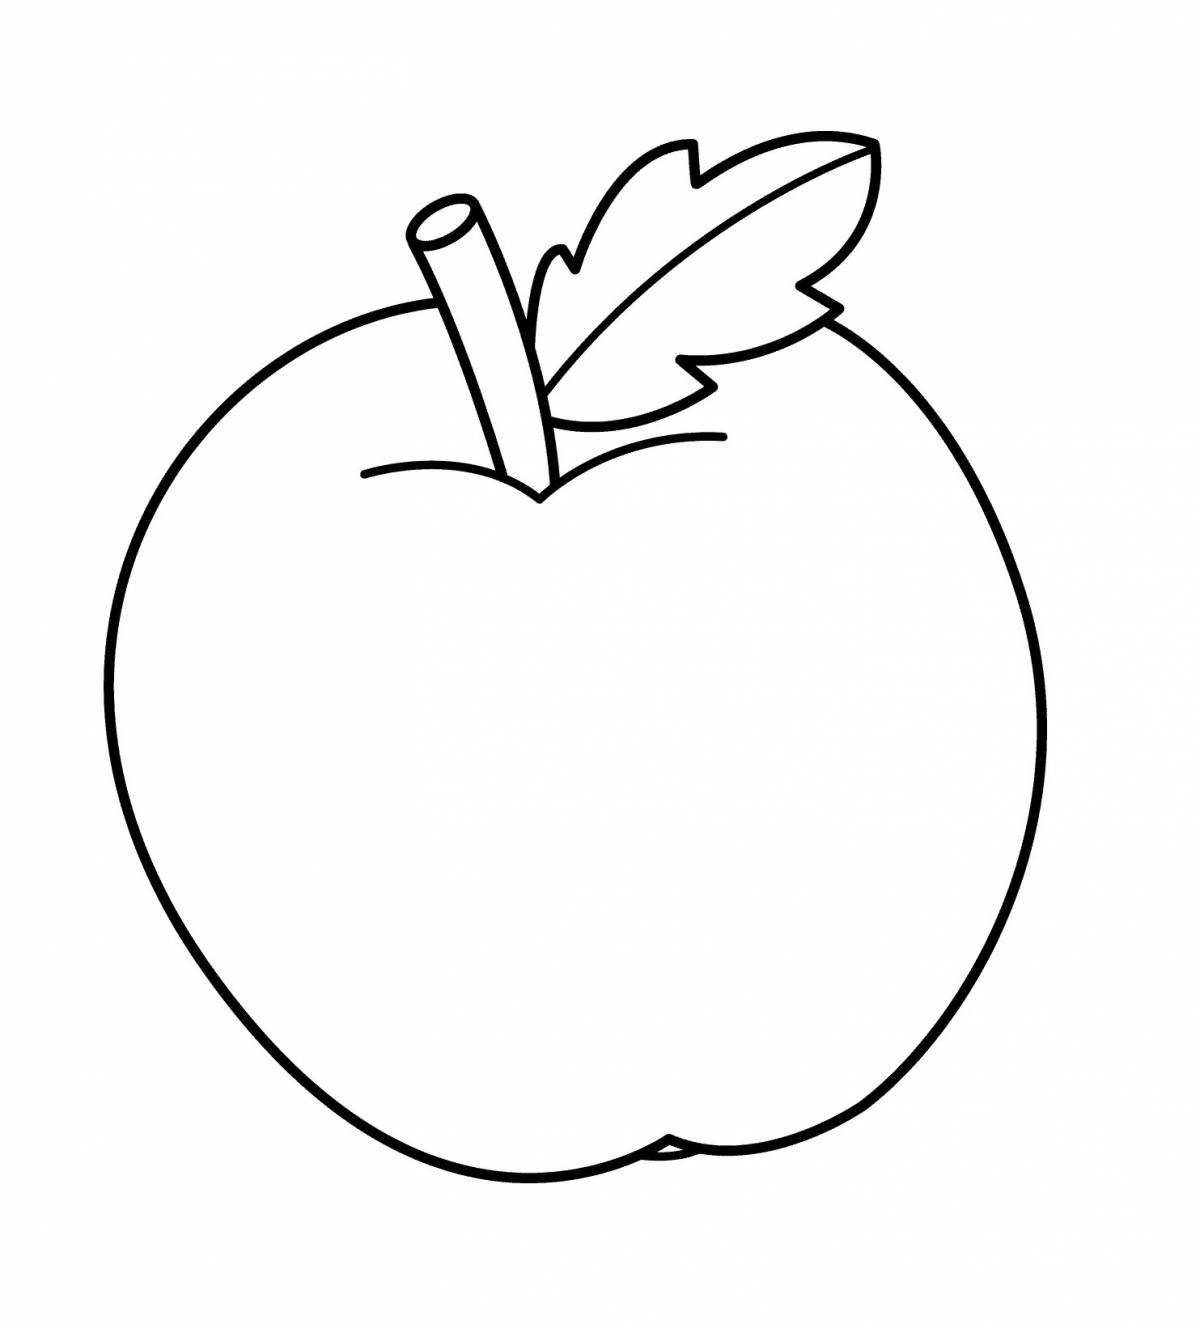 Coloring book sweet apple and pear